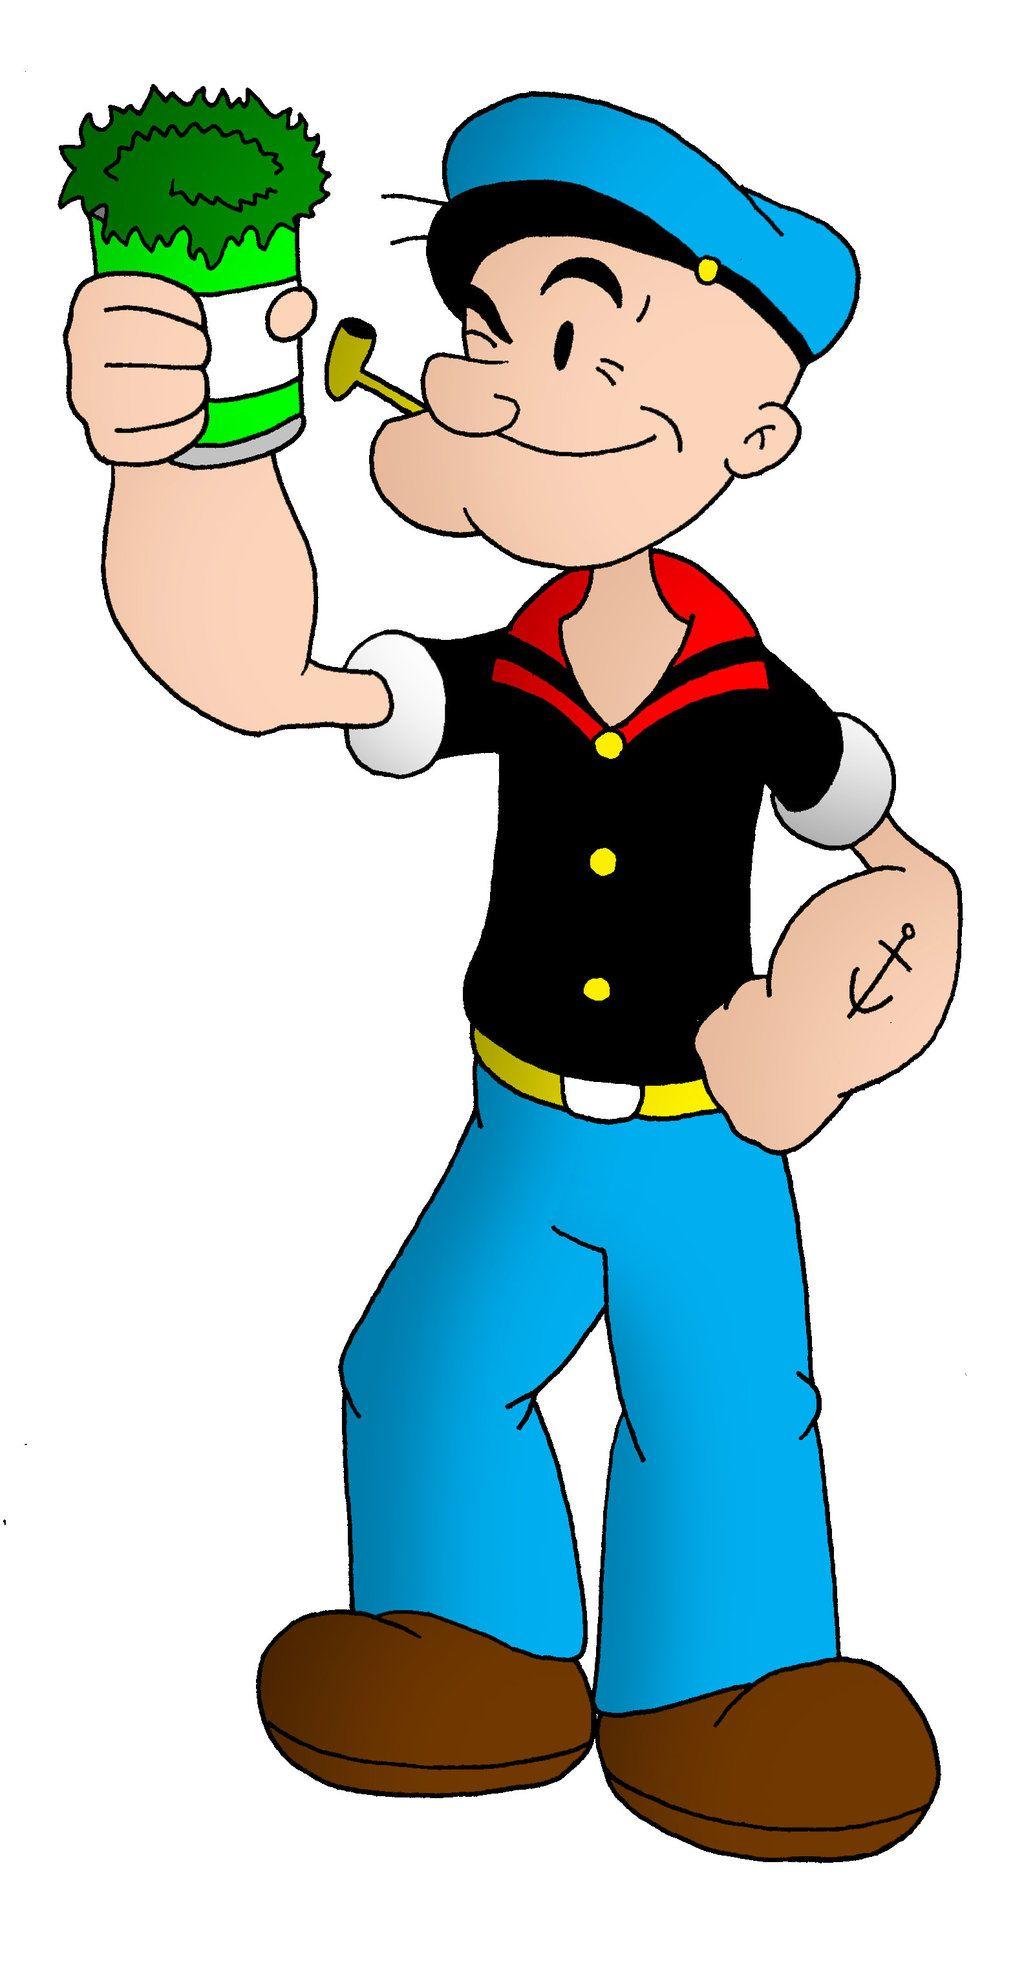 Popeye The Sailor Man Cartoon Backgrounds 1 HD Wallpapers